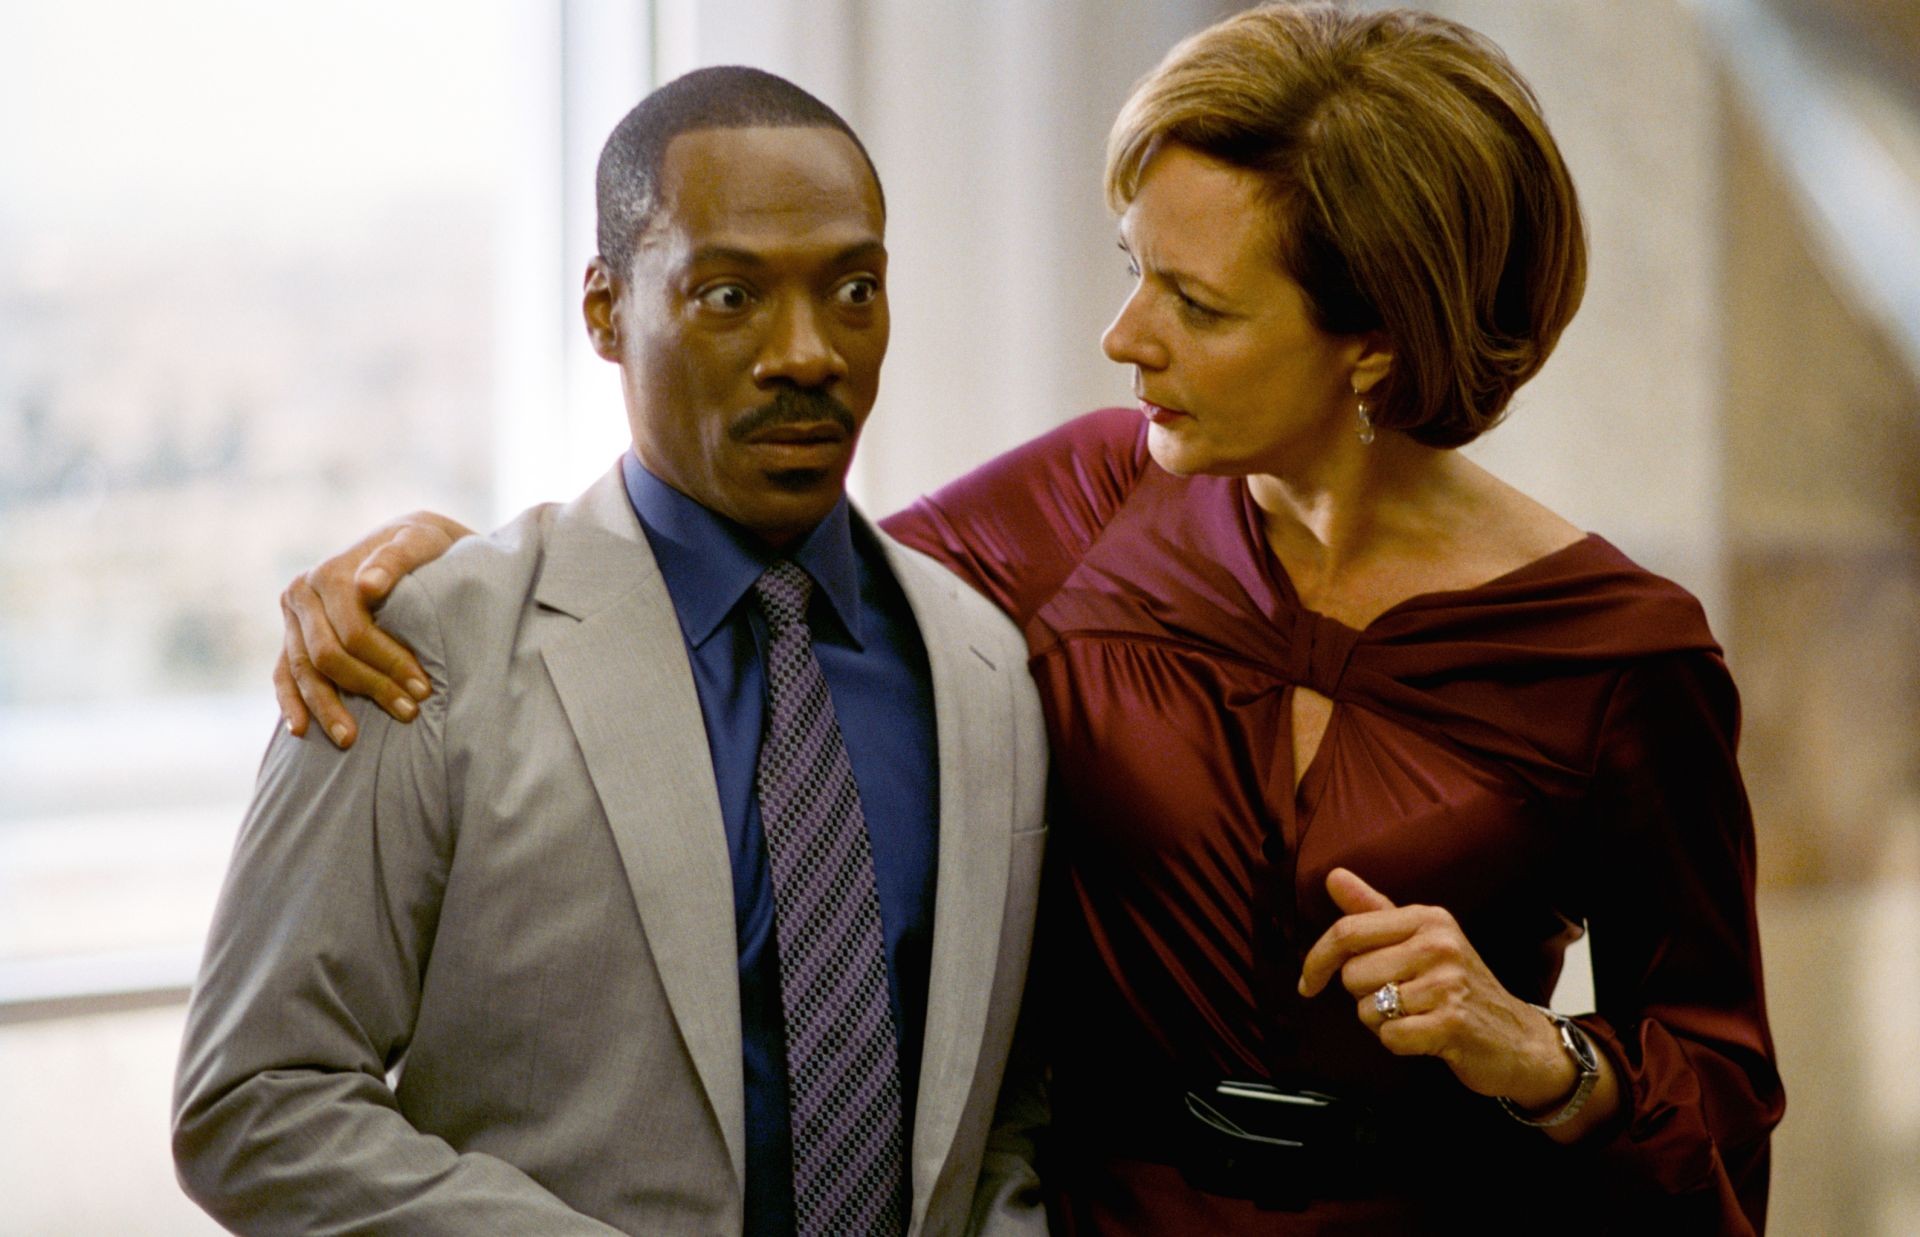 Eddie Murphy stars as Jack McCall and Allison Janney stars as Samantha Davis in DreamWorks SKG's A Thousand Words (2012). Photo credit by Bruce McBroom.